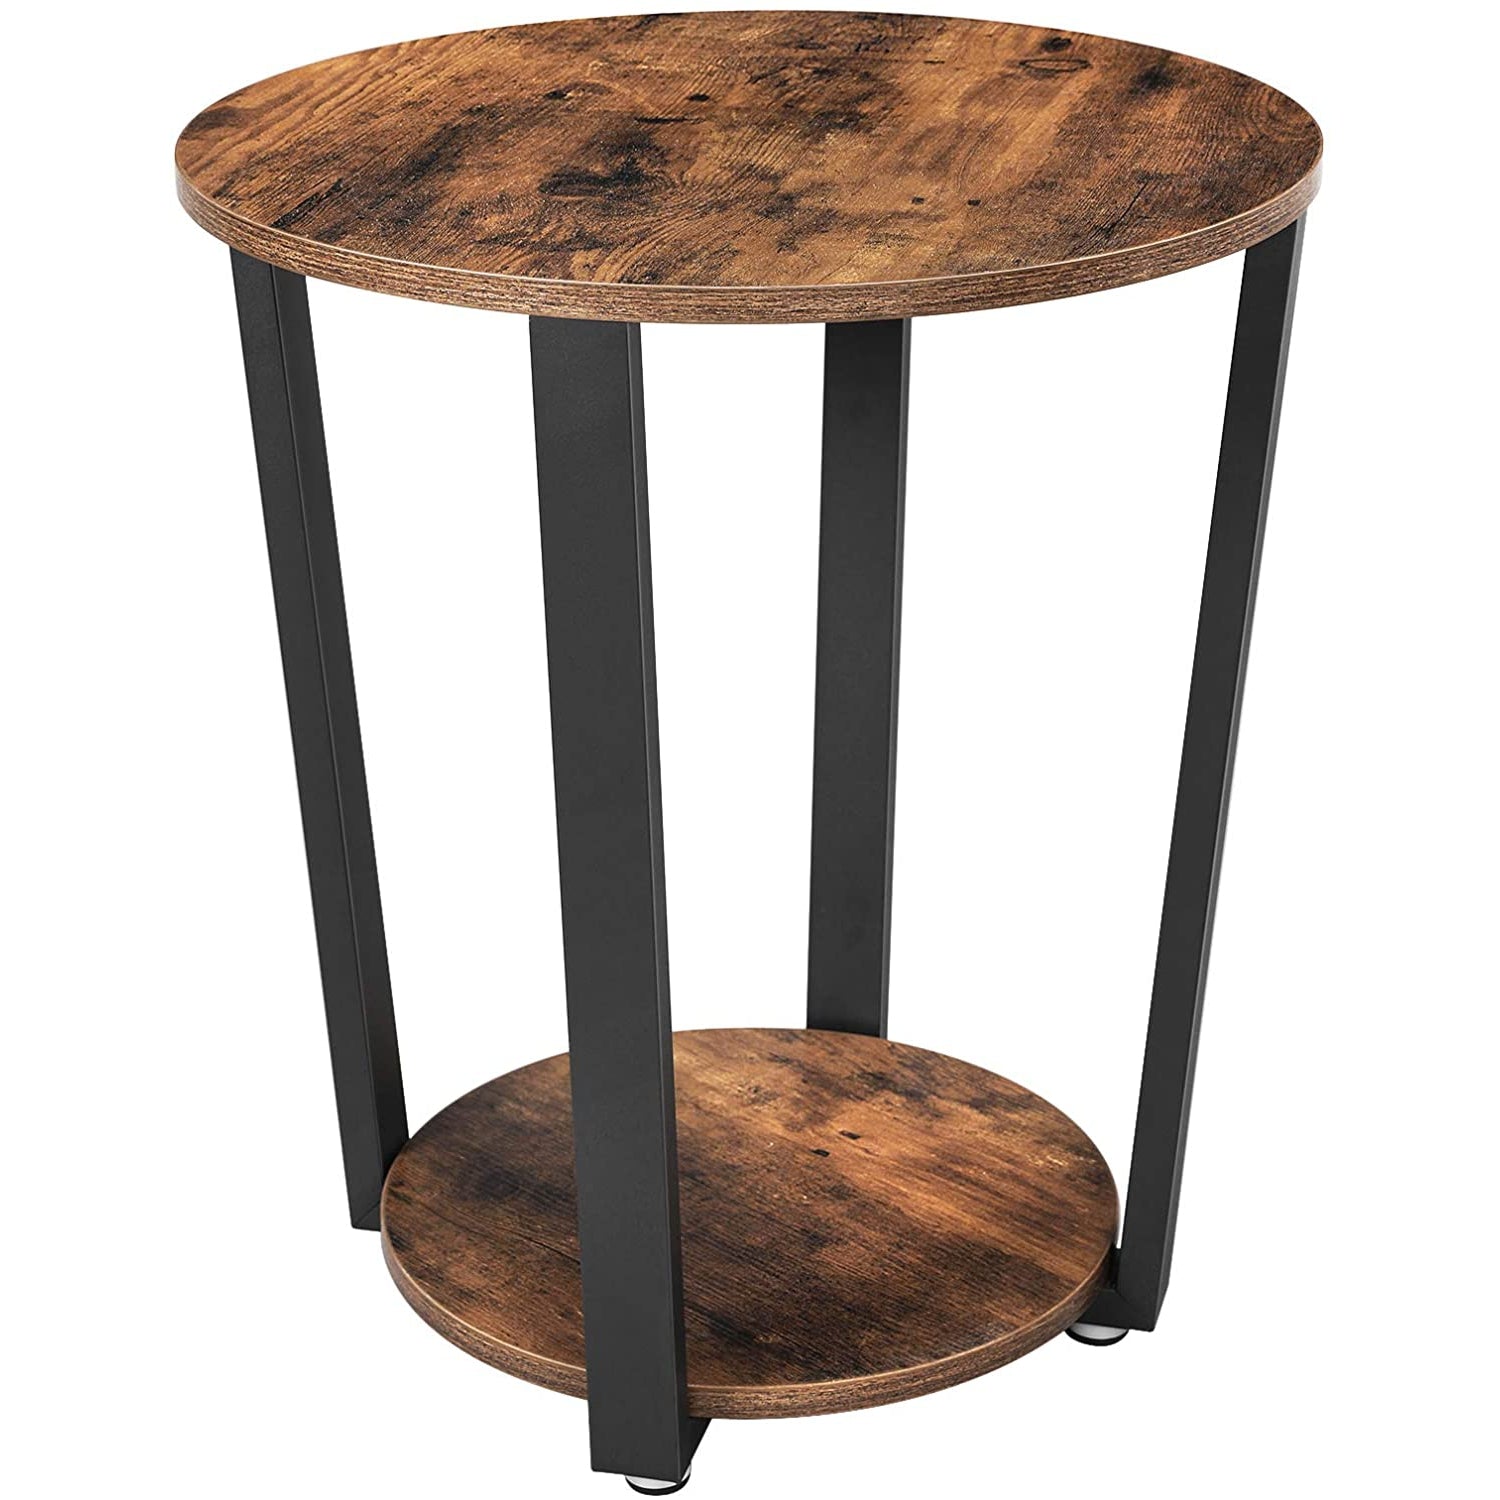 Nancy's Economy Side table - Coffee table - Coffee table - Round - Industrial - Brown - Processed Wood - Metal - 50 x 50 x 57 cm